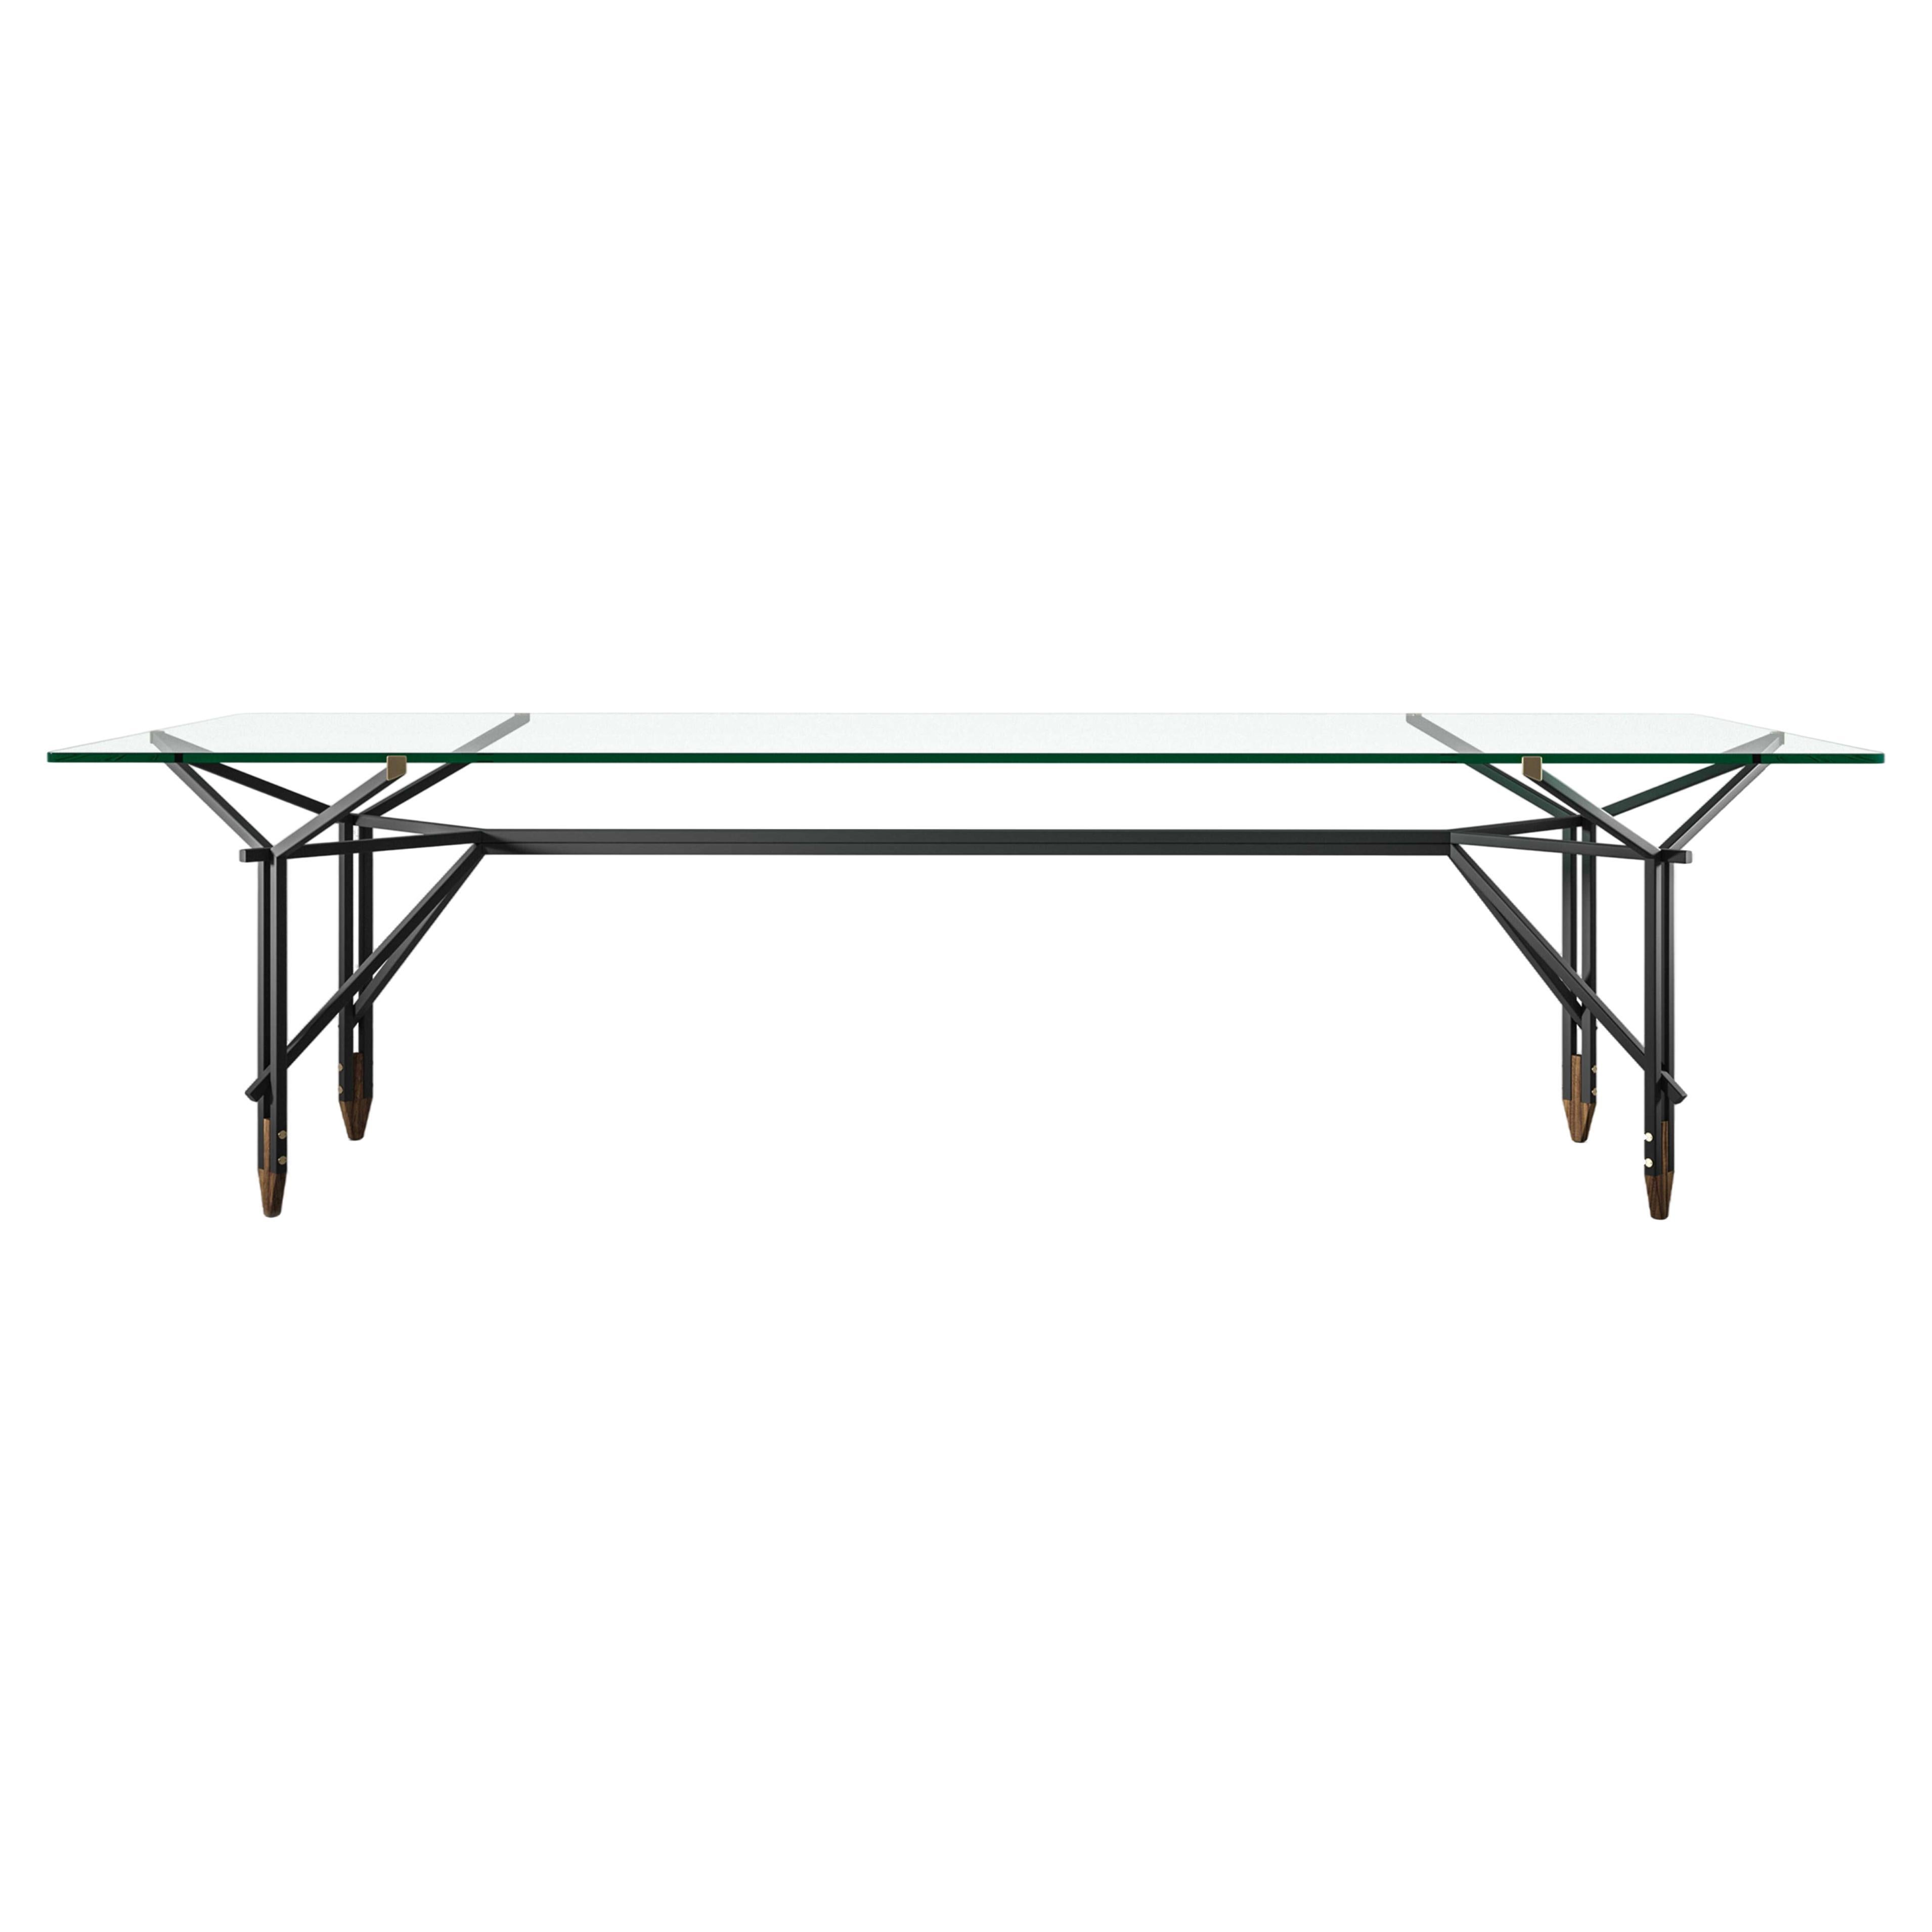 Ico Parisi Olimpino Sculptural Glass Metal Dining Table for Cassina, new For Sale